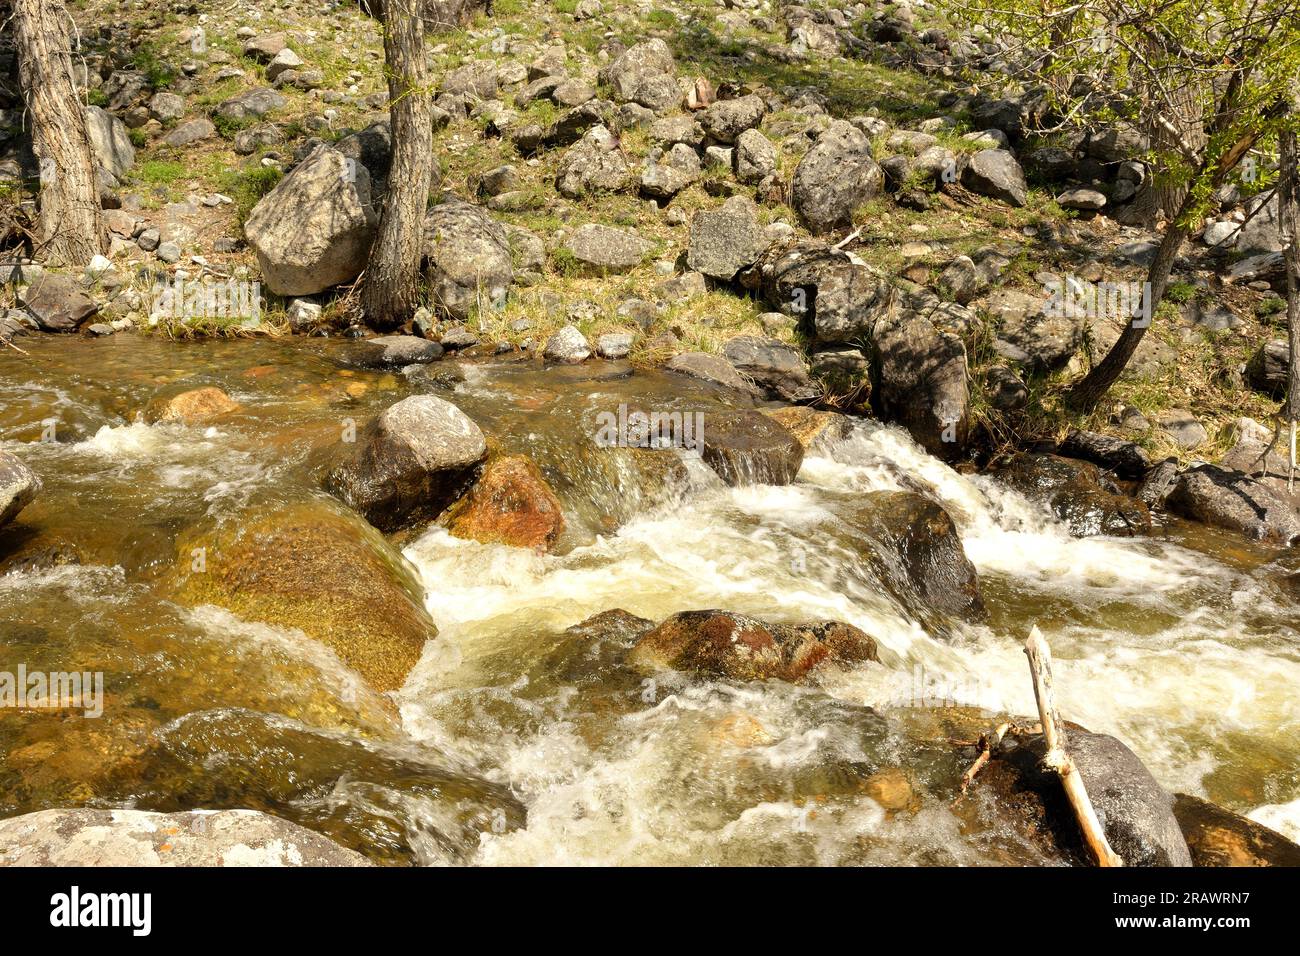 The clear waters of a turbulent stream flowing down from the mountains through the spring forest go around the stones in their channel. Ak-Karum river Stock Photo